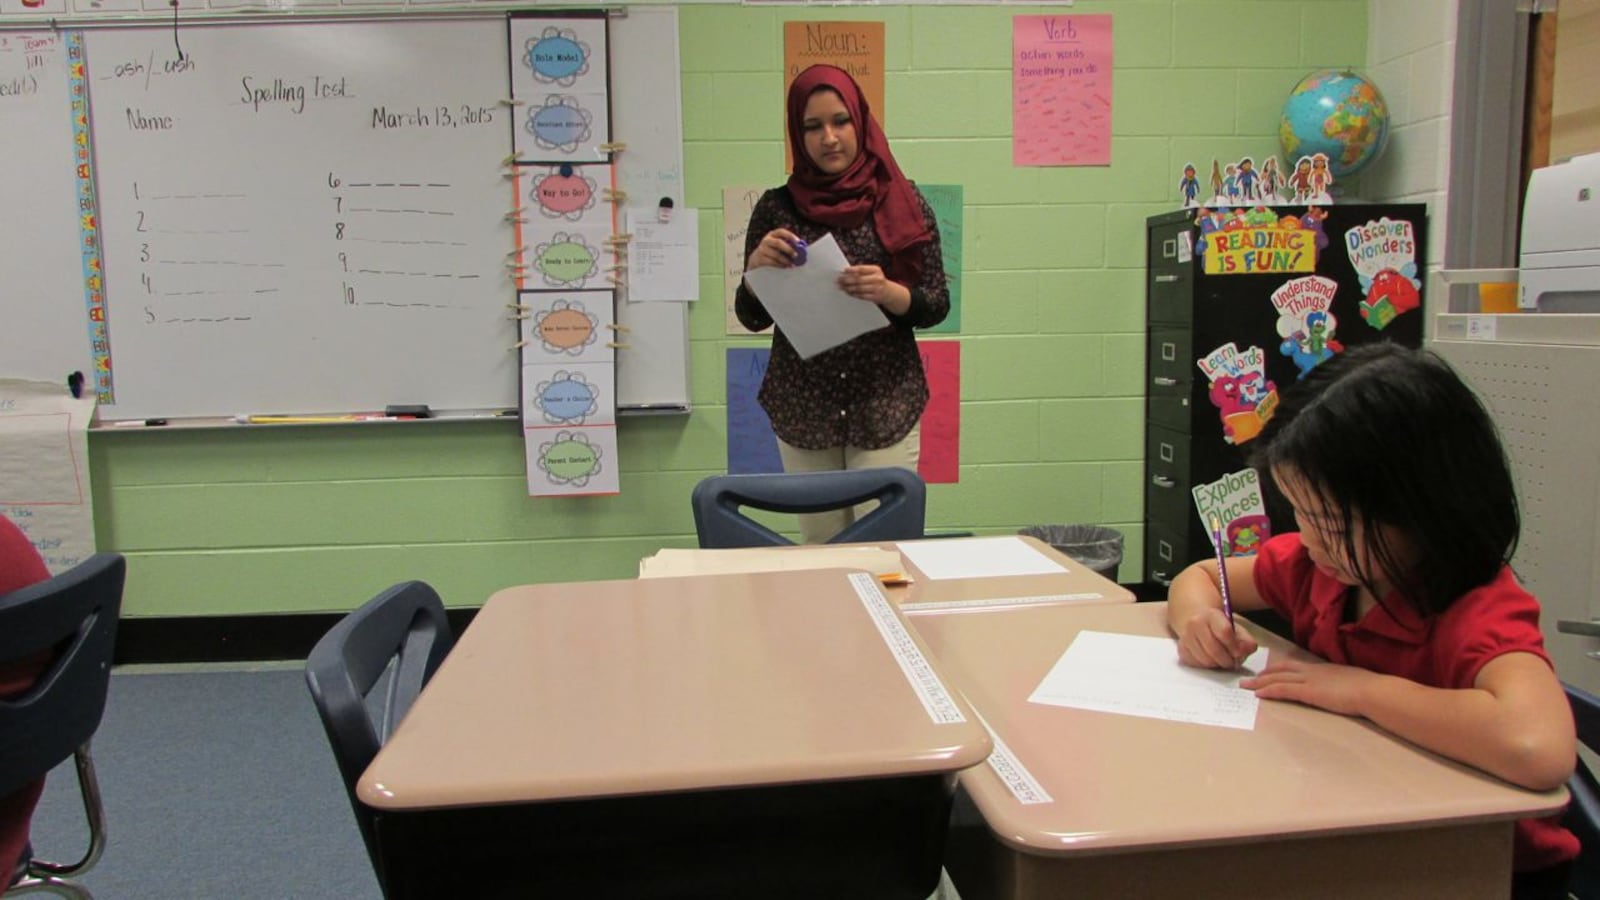 An IPS School 79 student works on a test while her teacher looks on.